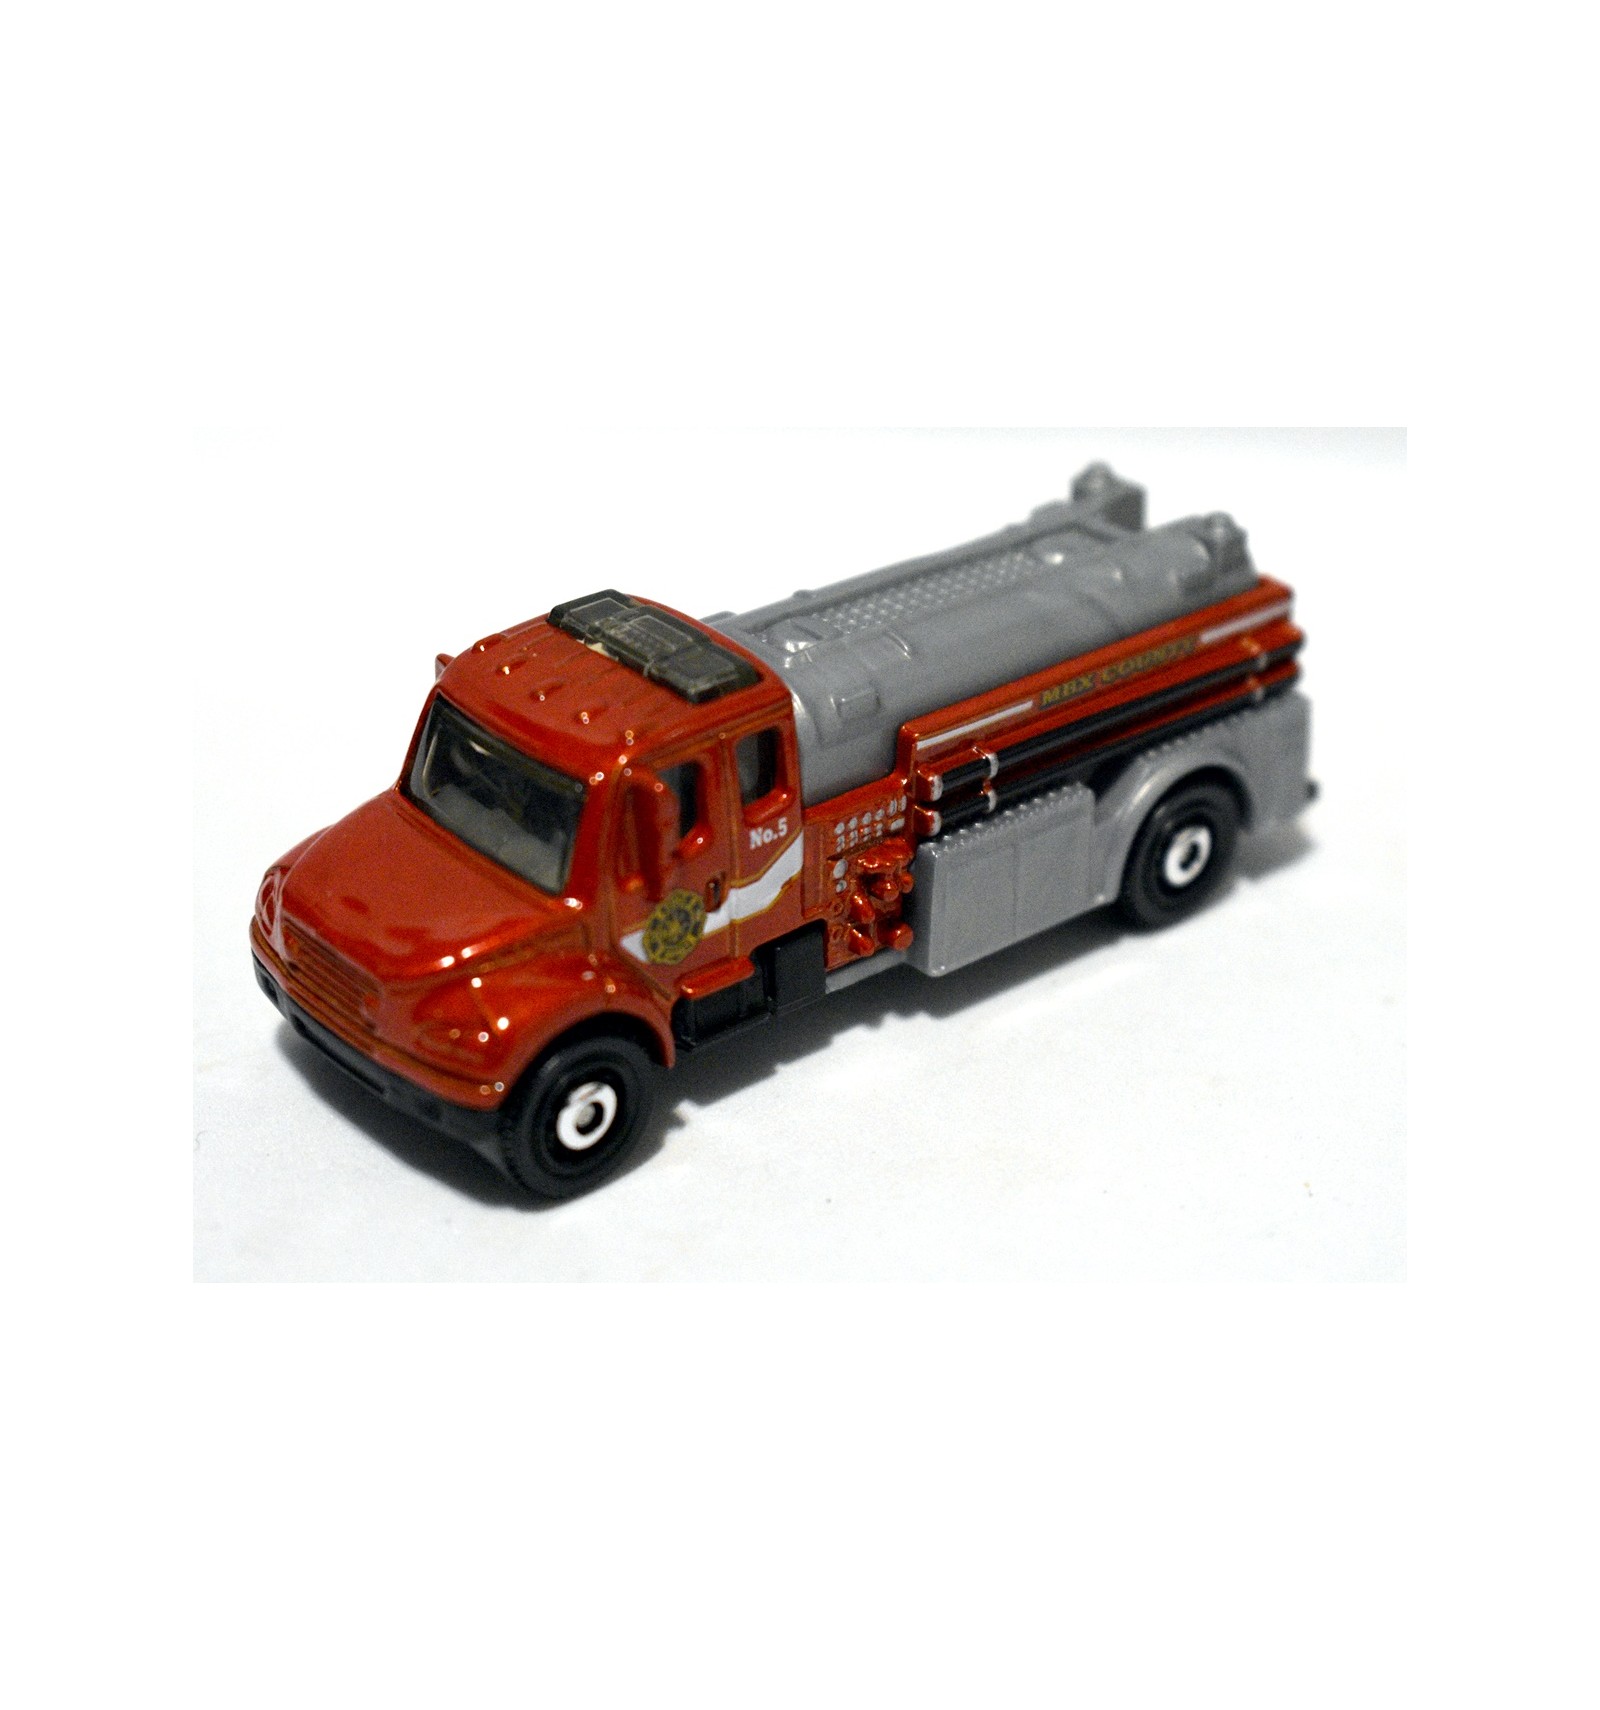 60/125 Red Freightliner M2 106 Fire Truck 2016 MBX Heroic Rescue Matchbox 